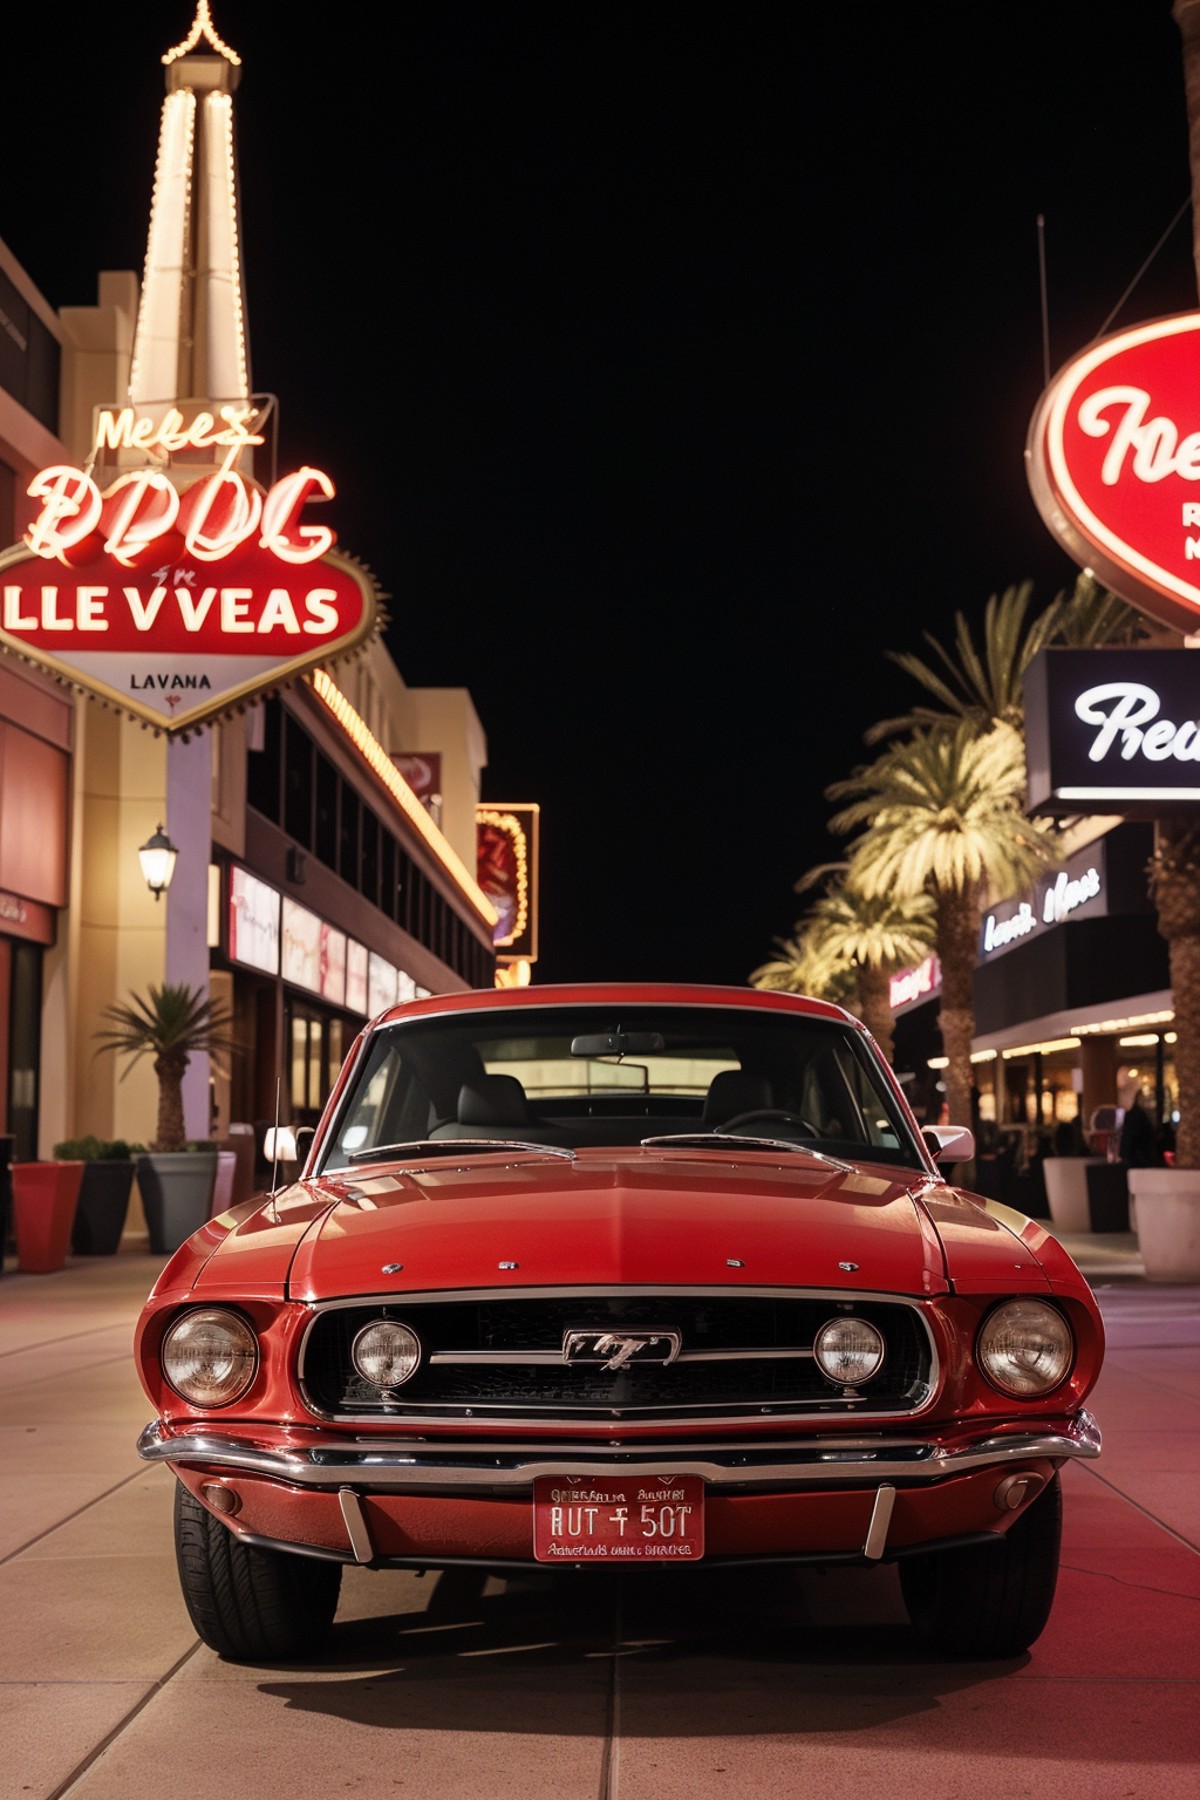 Photo of a classic red mustang car parked in las vegas strip at night